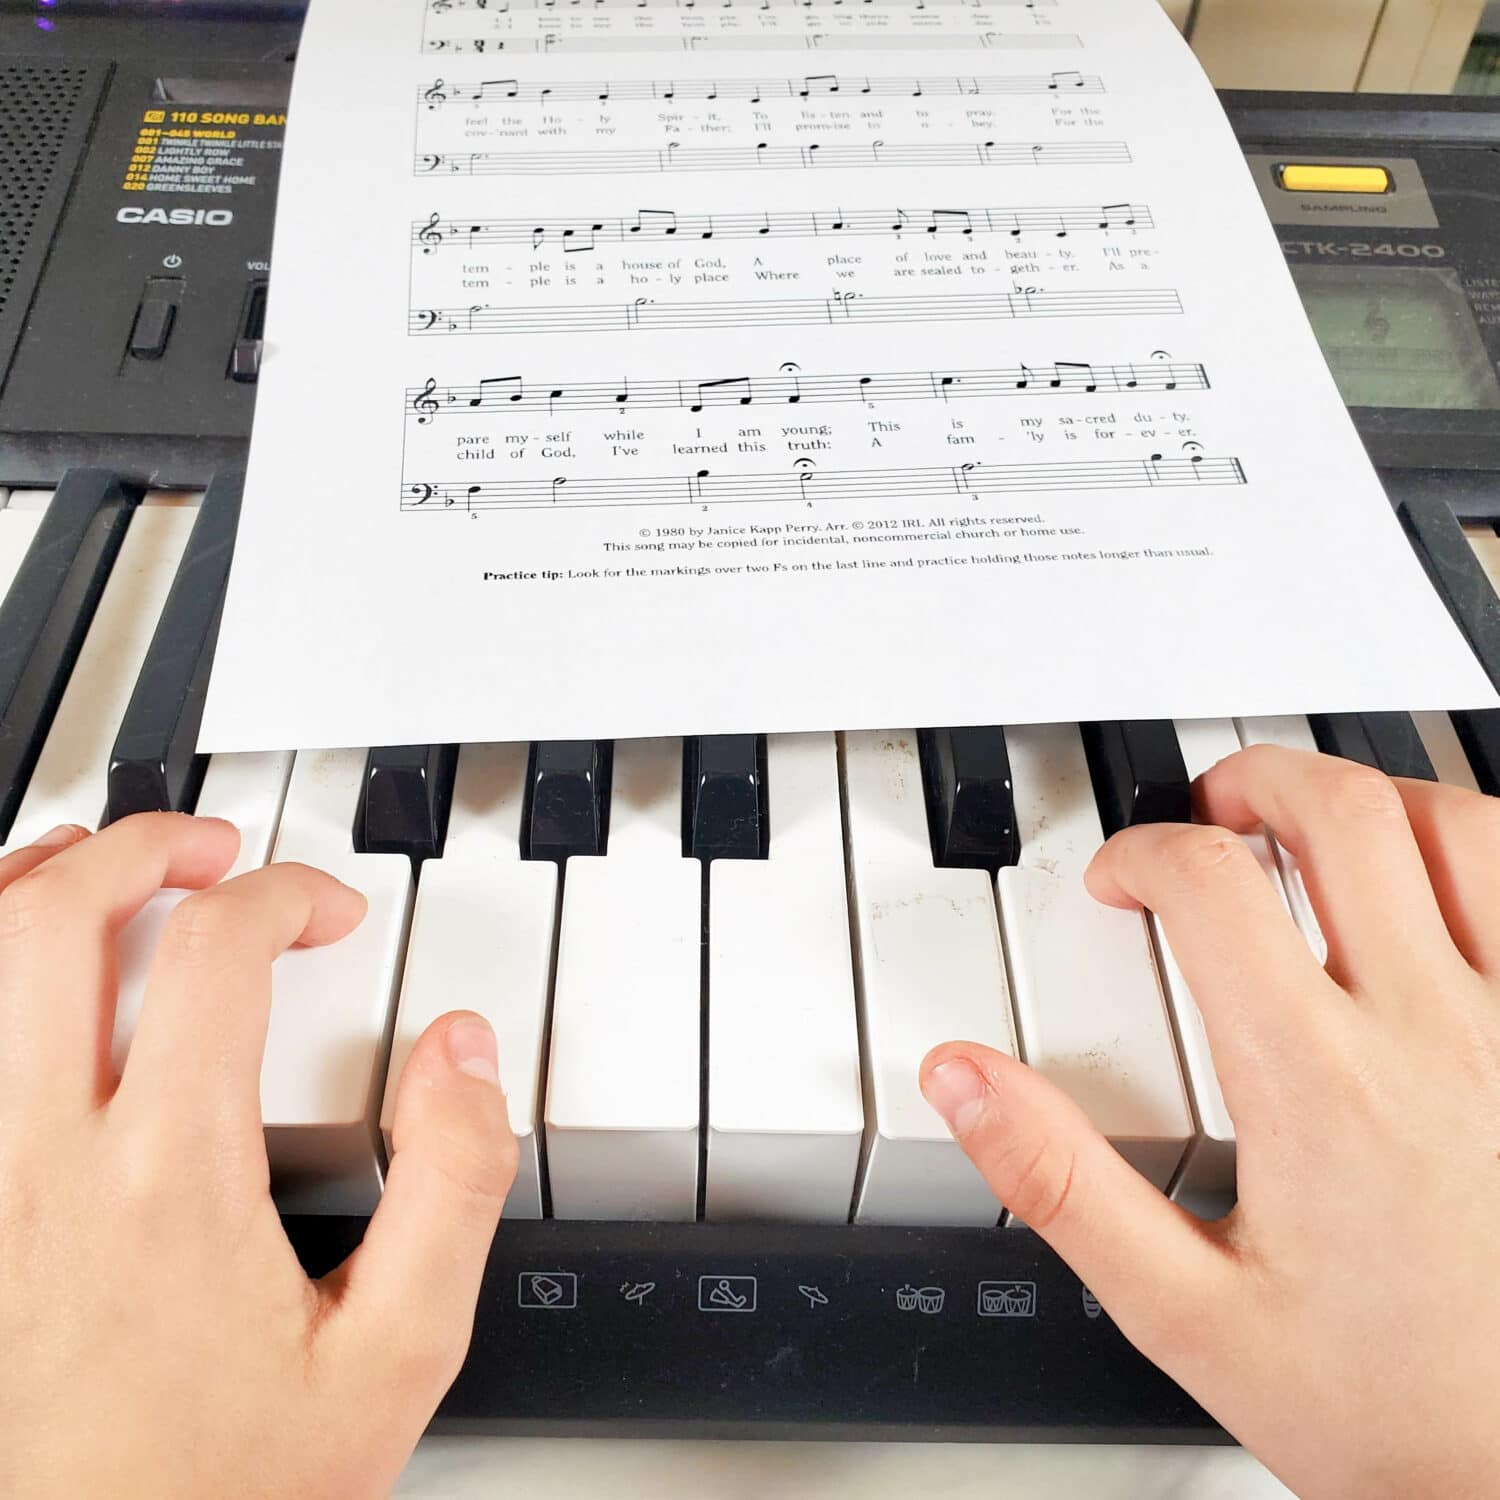 5 fun and easy ways to use "I Can Play It" simplified Primary songs sheet music! Incorporate more activities with the senior primary children learning to play the beautiful Primary music at home or at church. Ideas for LDS Primary music Leaders for singing time or fun at home challenges for the kids.